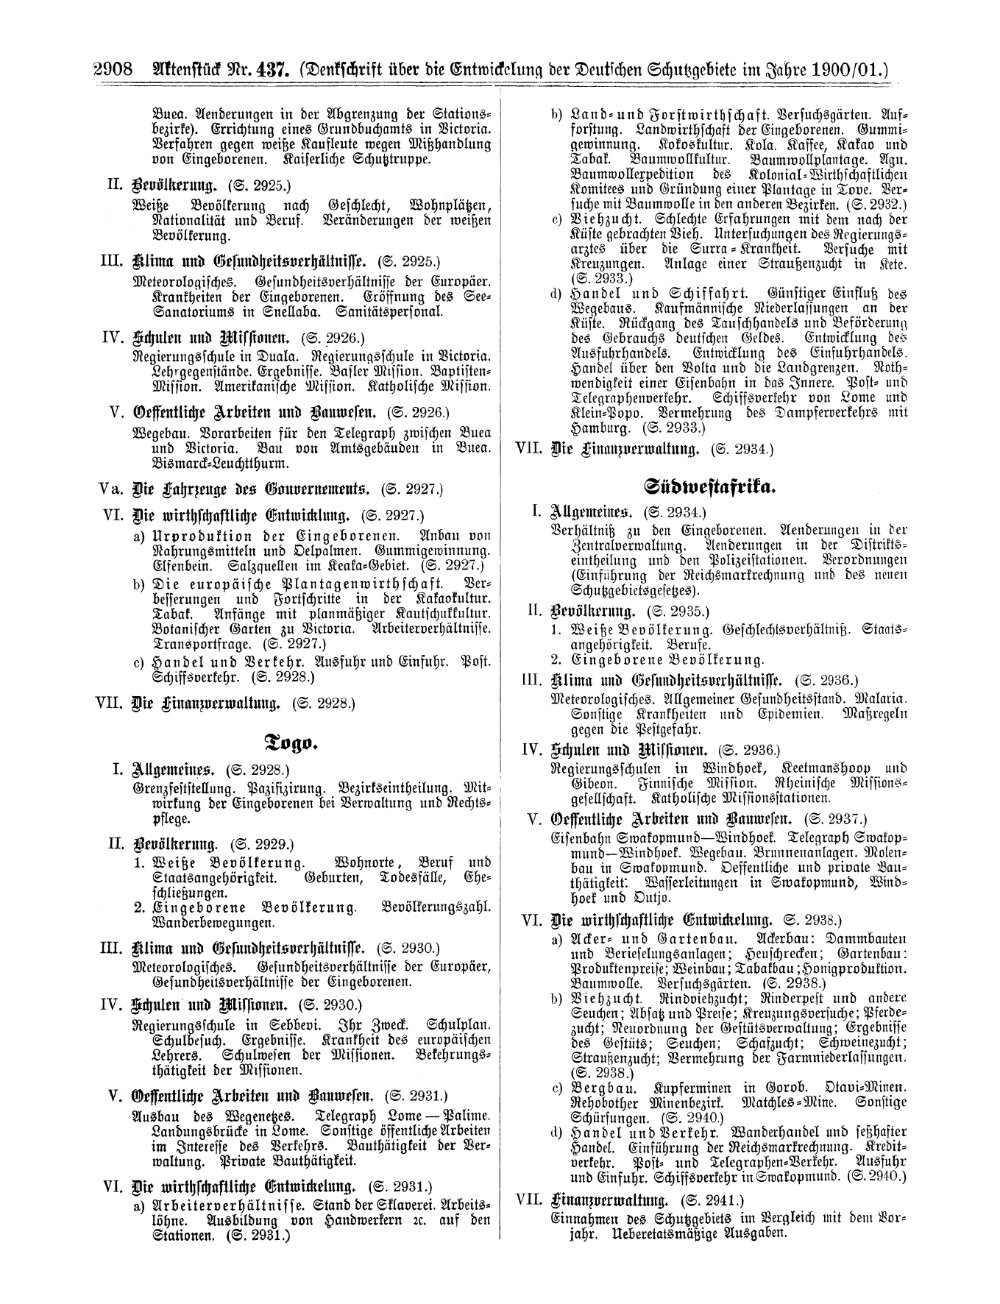 Scan of page 2908